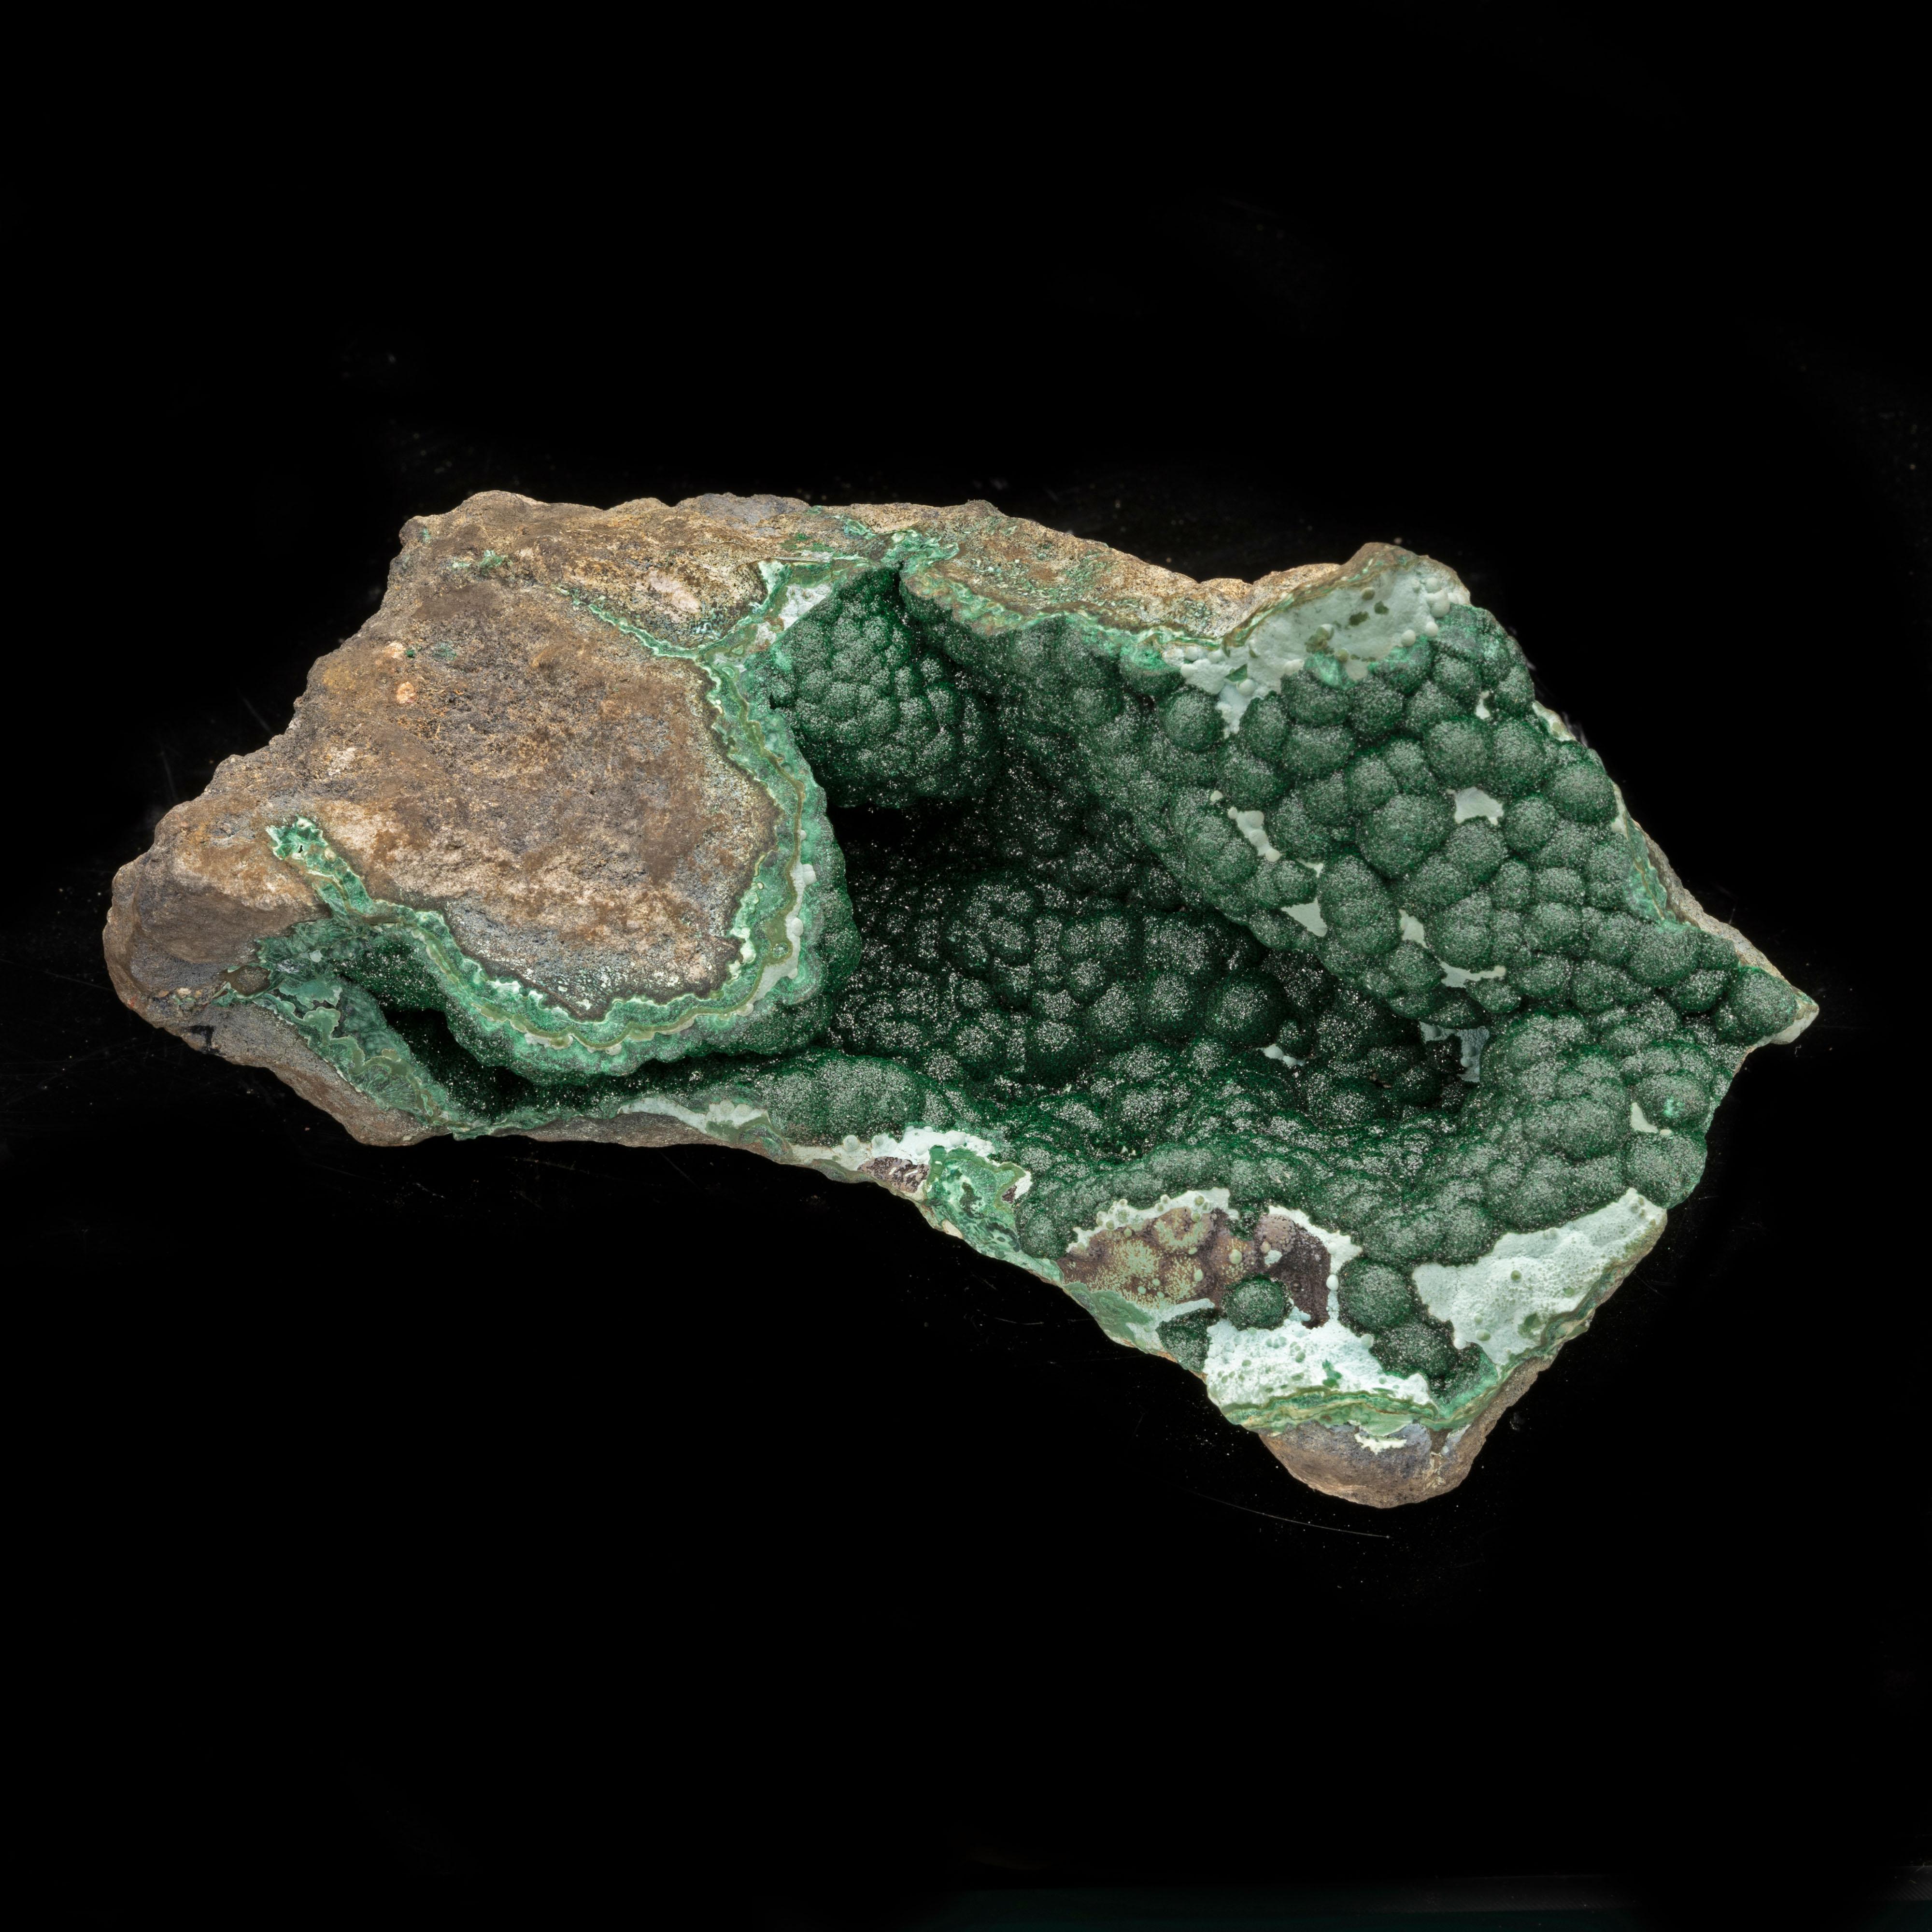 The velvety, druze-coated interior of this vug or natural crystal-lined rock crevice is filled with an abundance of beautifully formed deep emerald green botryoidal malachite crystals. The piece holds a dynamic, sculptural form echoed by the